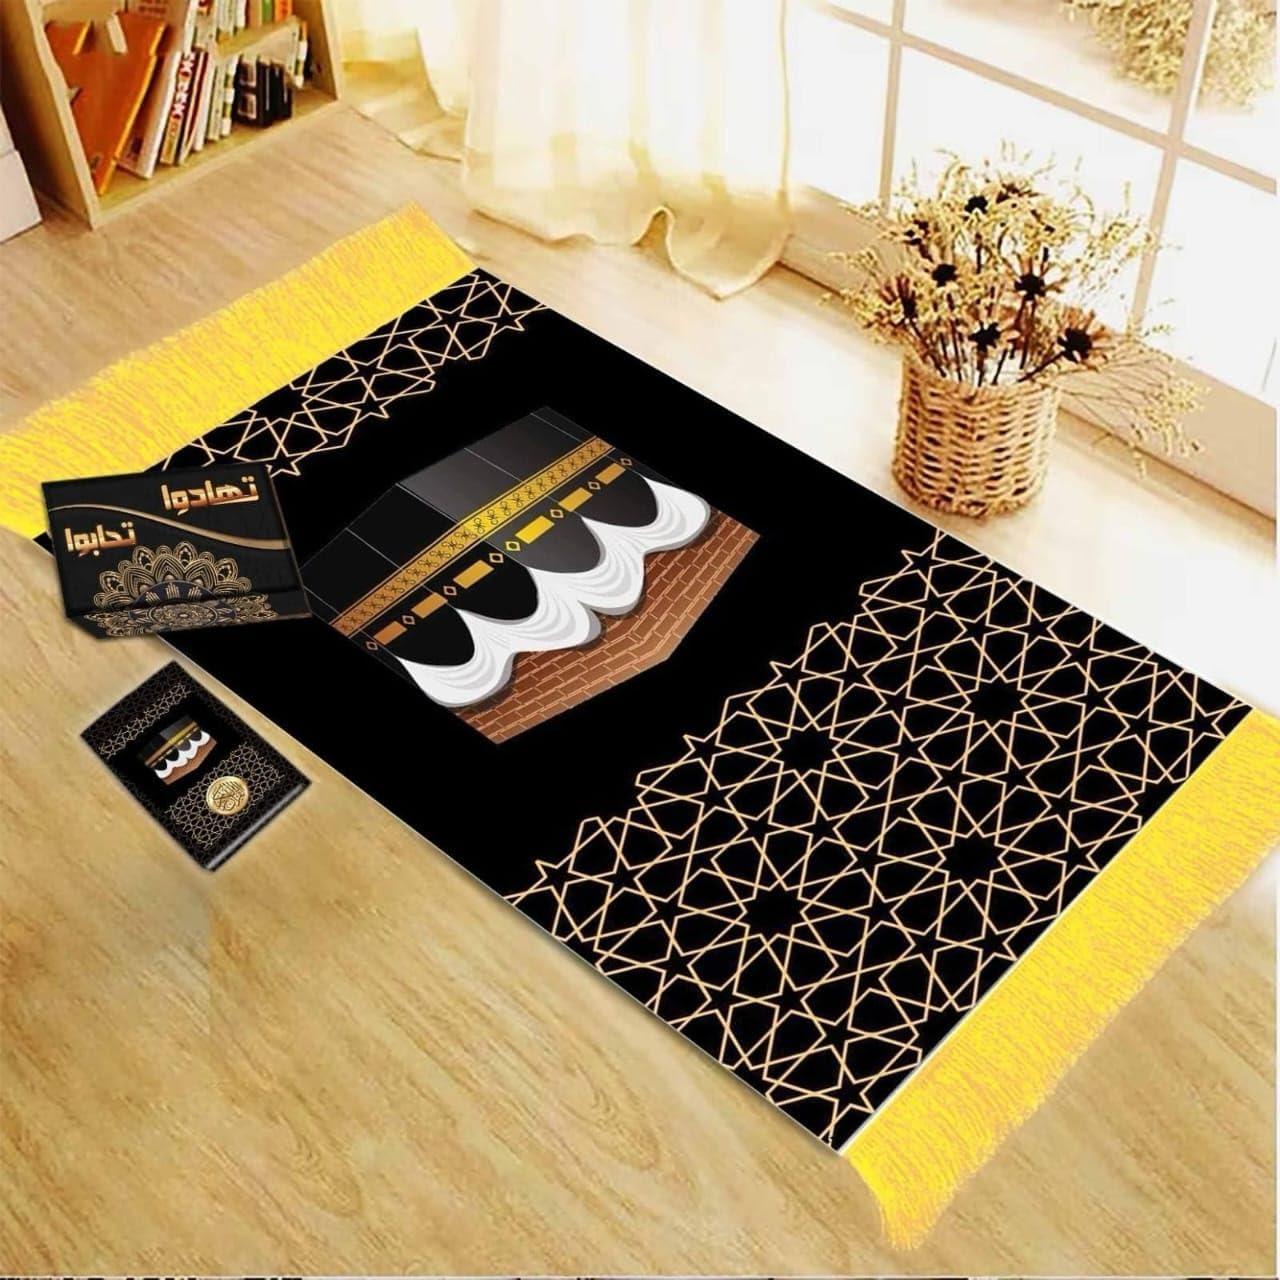 Ramadan box (velvet rug + Qur’an + incense burner + Azkar card + incense + rosary) Give yourself peace of mind with the cleanest material (the Kaaba)